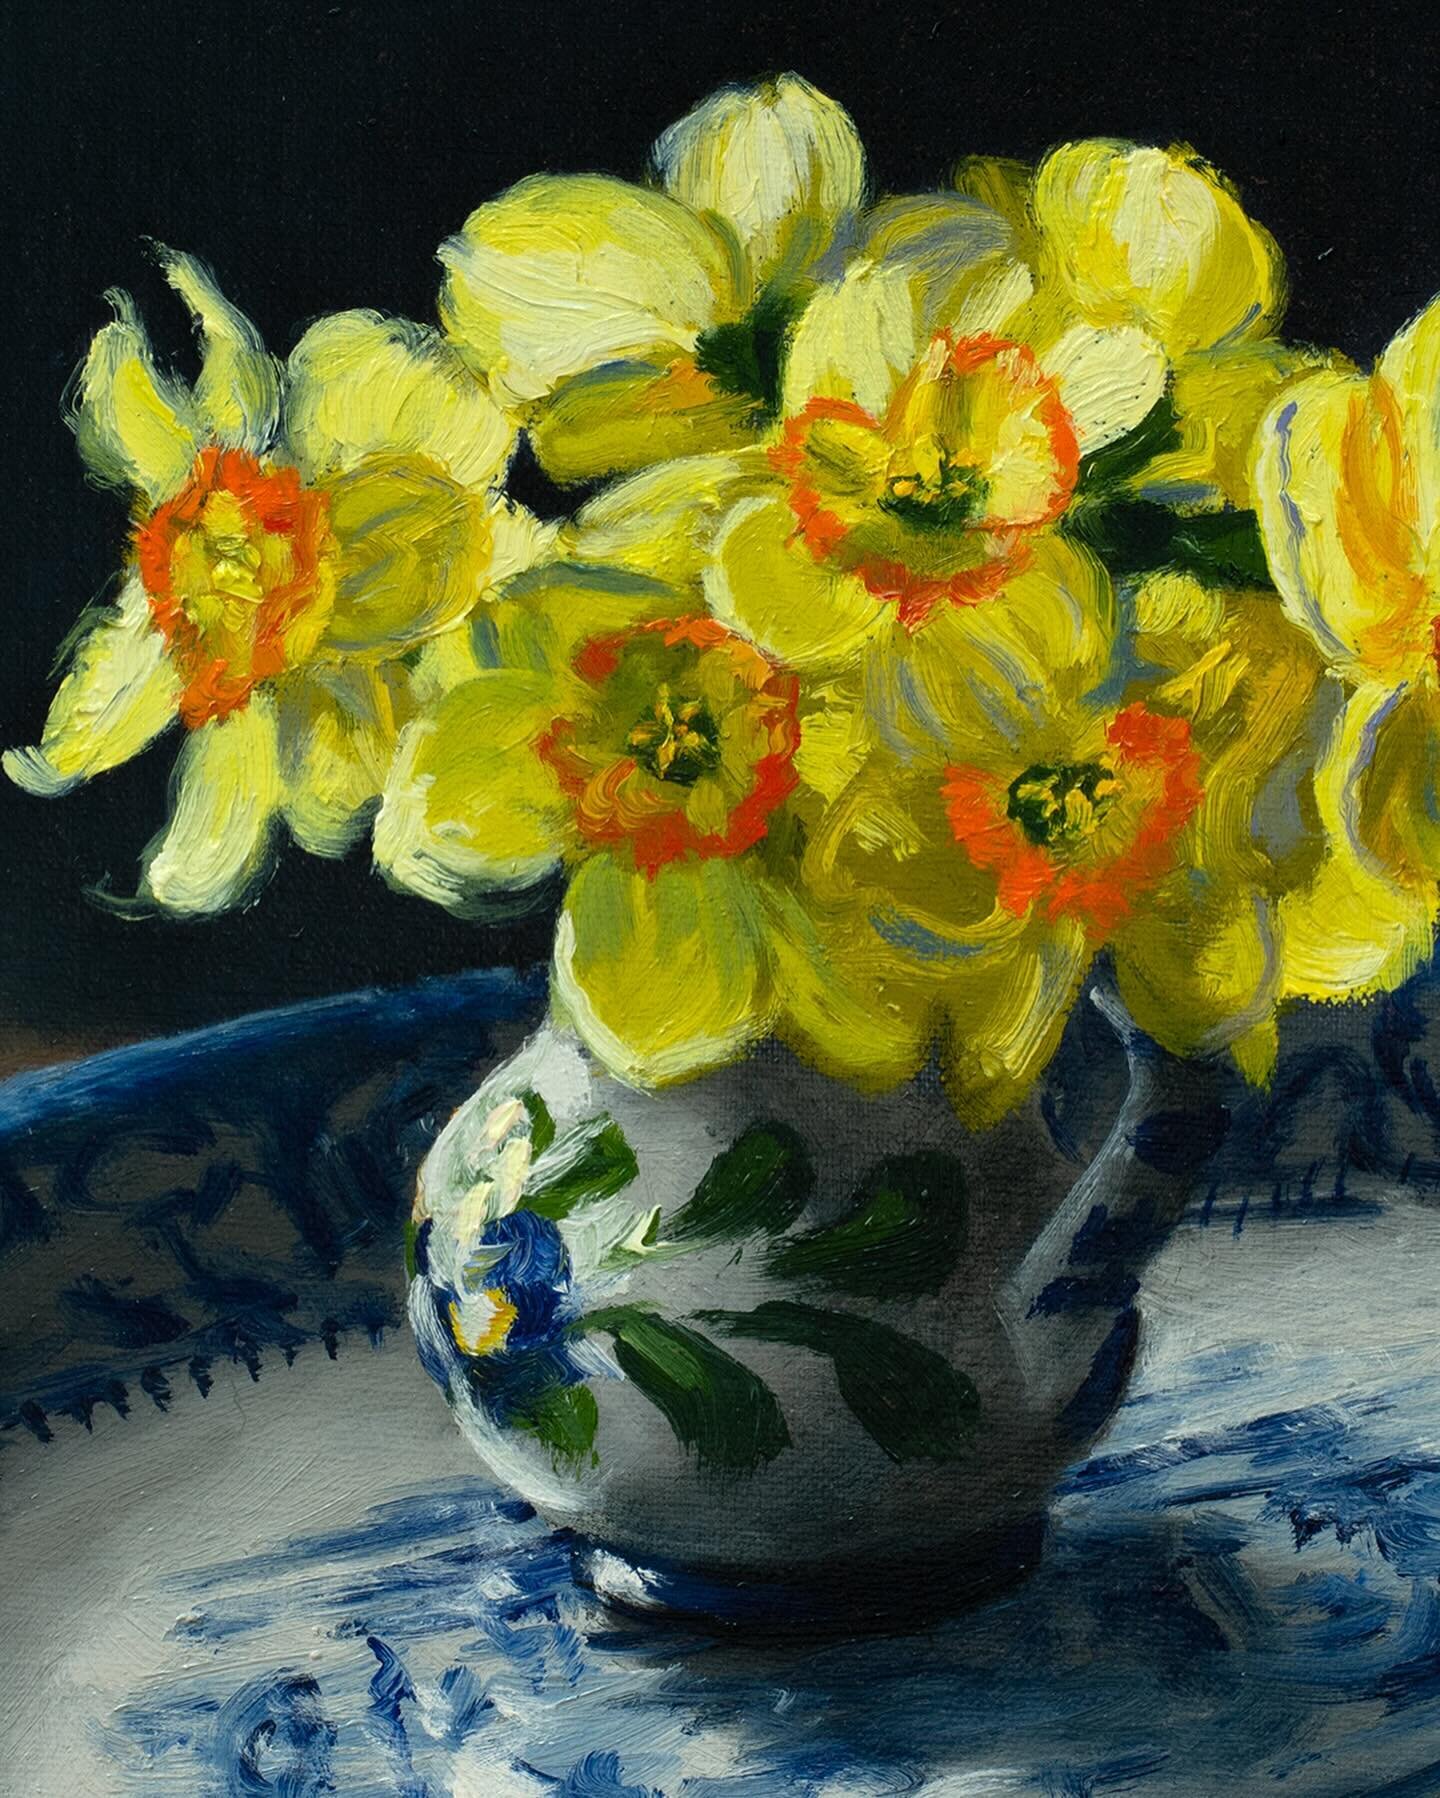 Glowing daffodils are @principlegallery for their upcoming 30th anniversary exhibition. It&rsquo;s such an honor exhibiting there. Drop by if you can. Opening is Friday, March 22nd. 

#Elizabethfloydart #floralstilllife #daffodilpainting